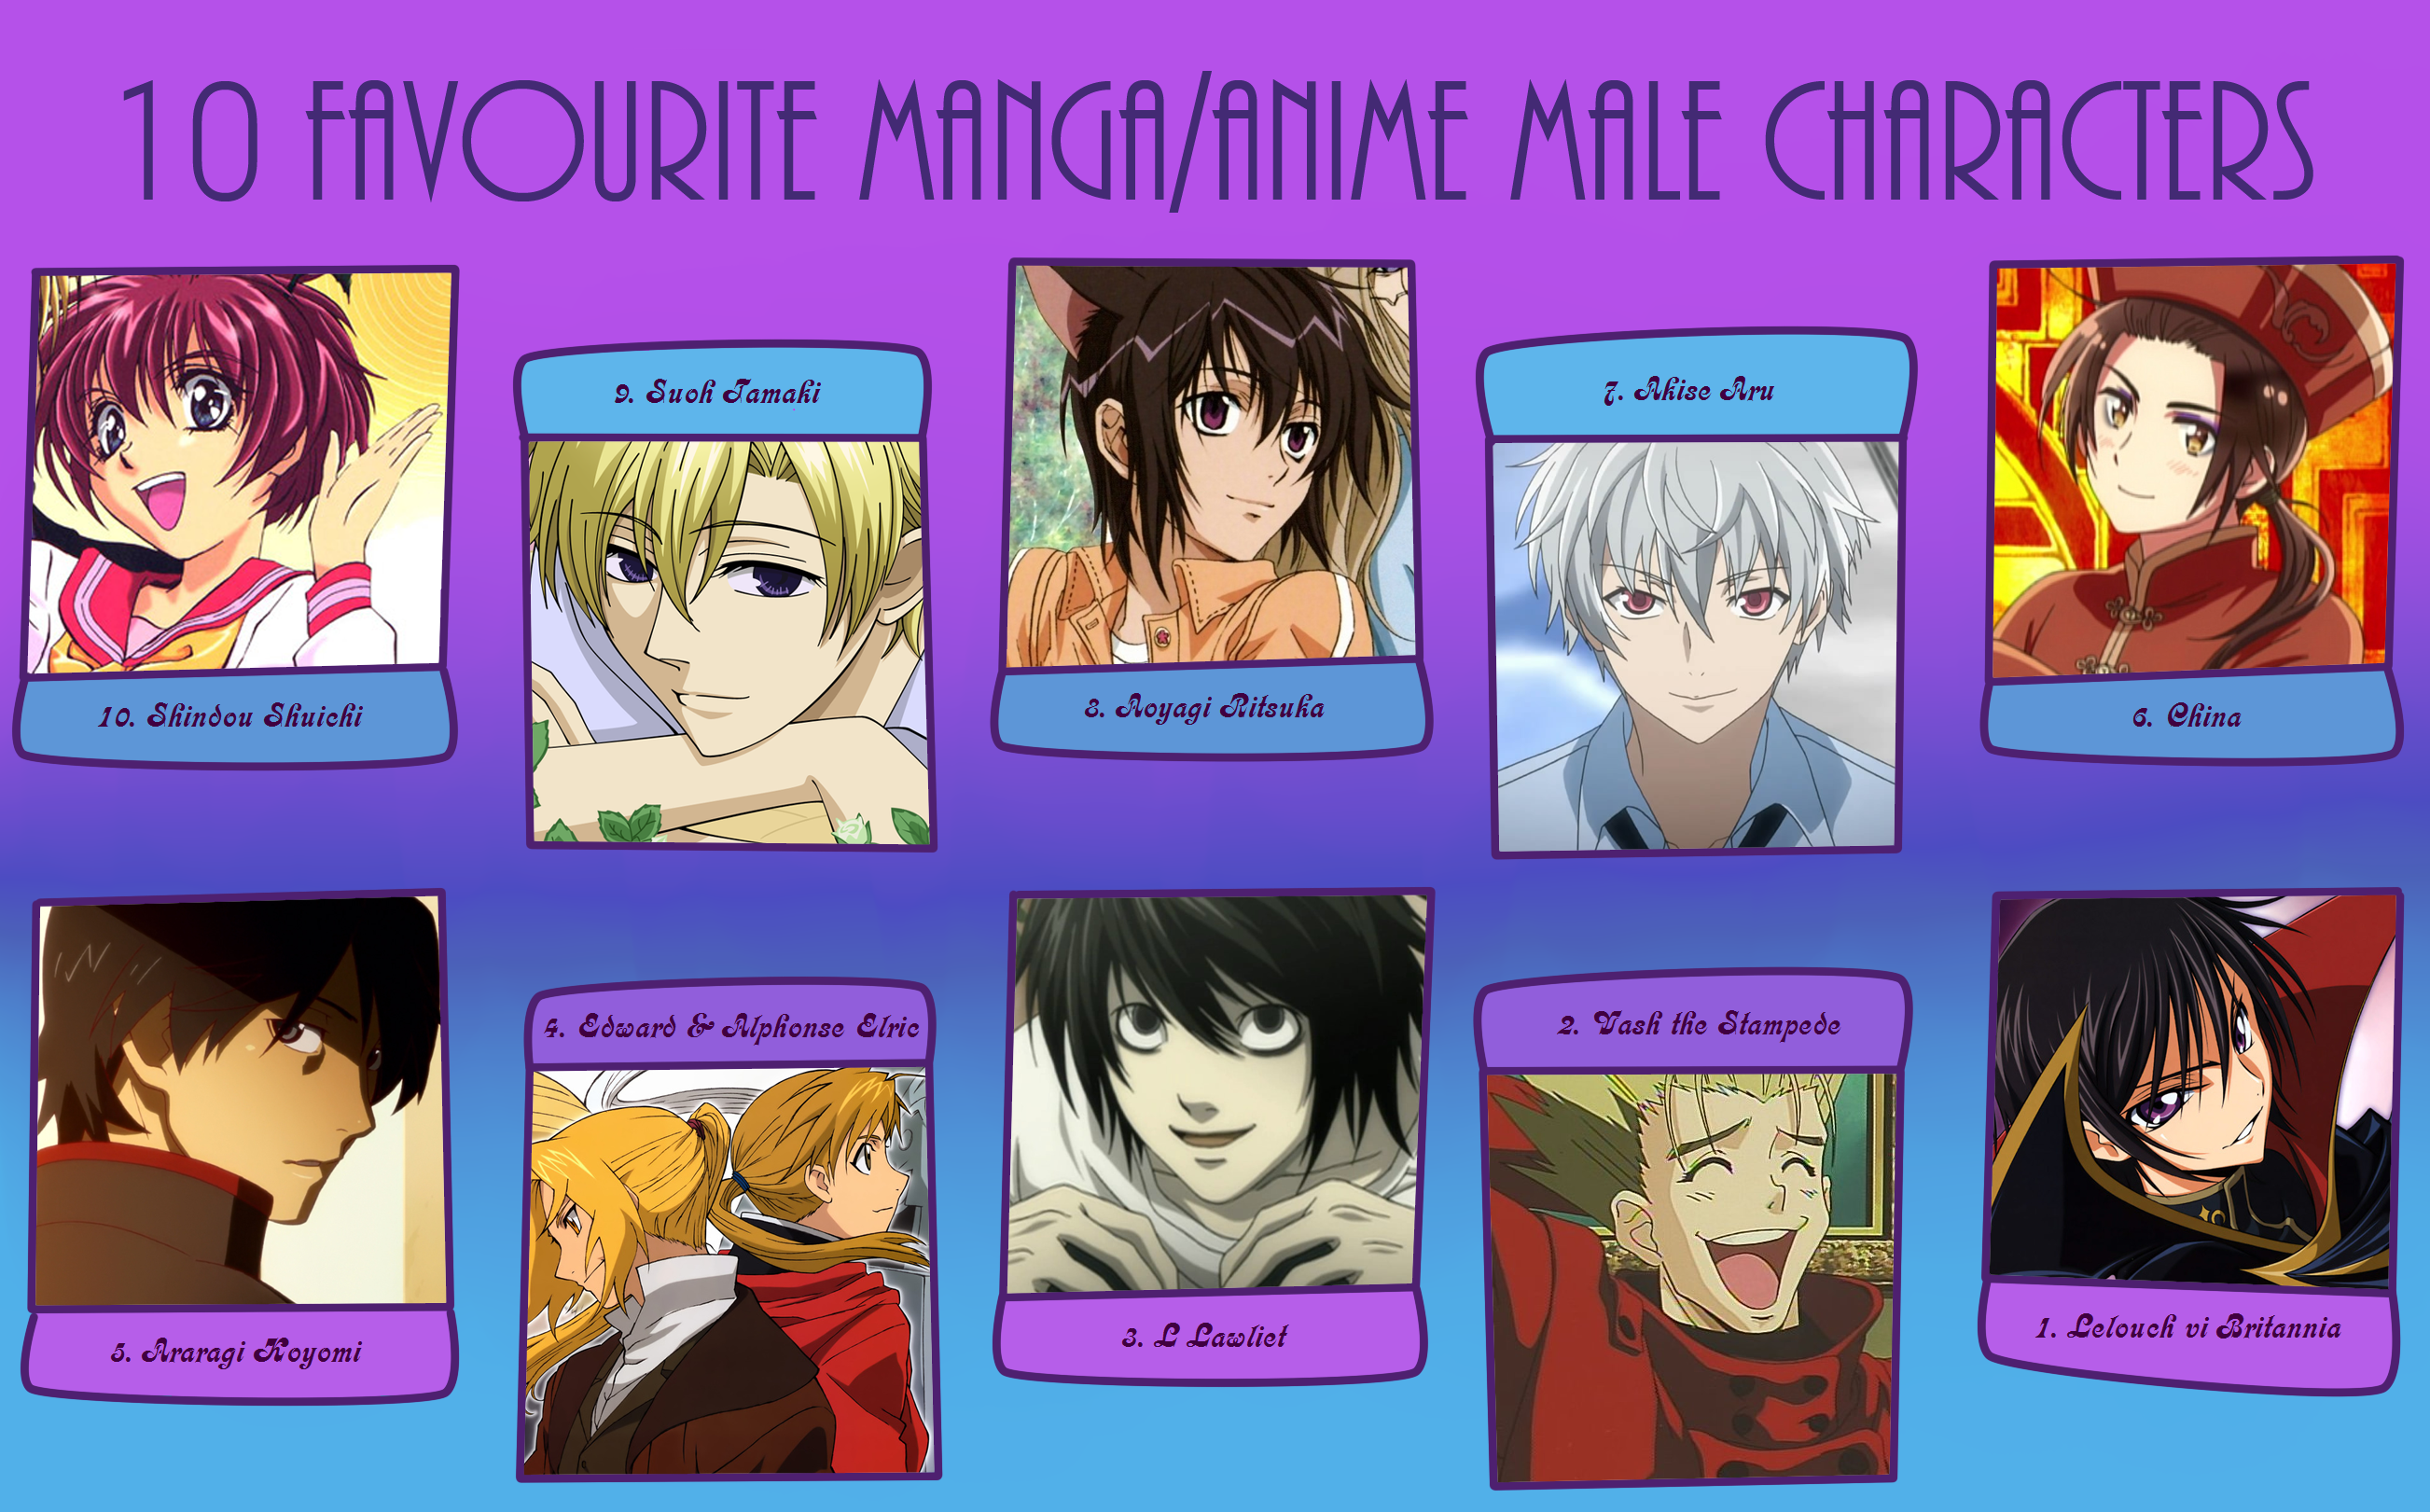 My Top 10 Favorite Male Anime/Manga Characters by GreenwavesInactive on  DeviantArt